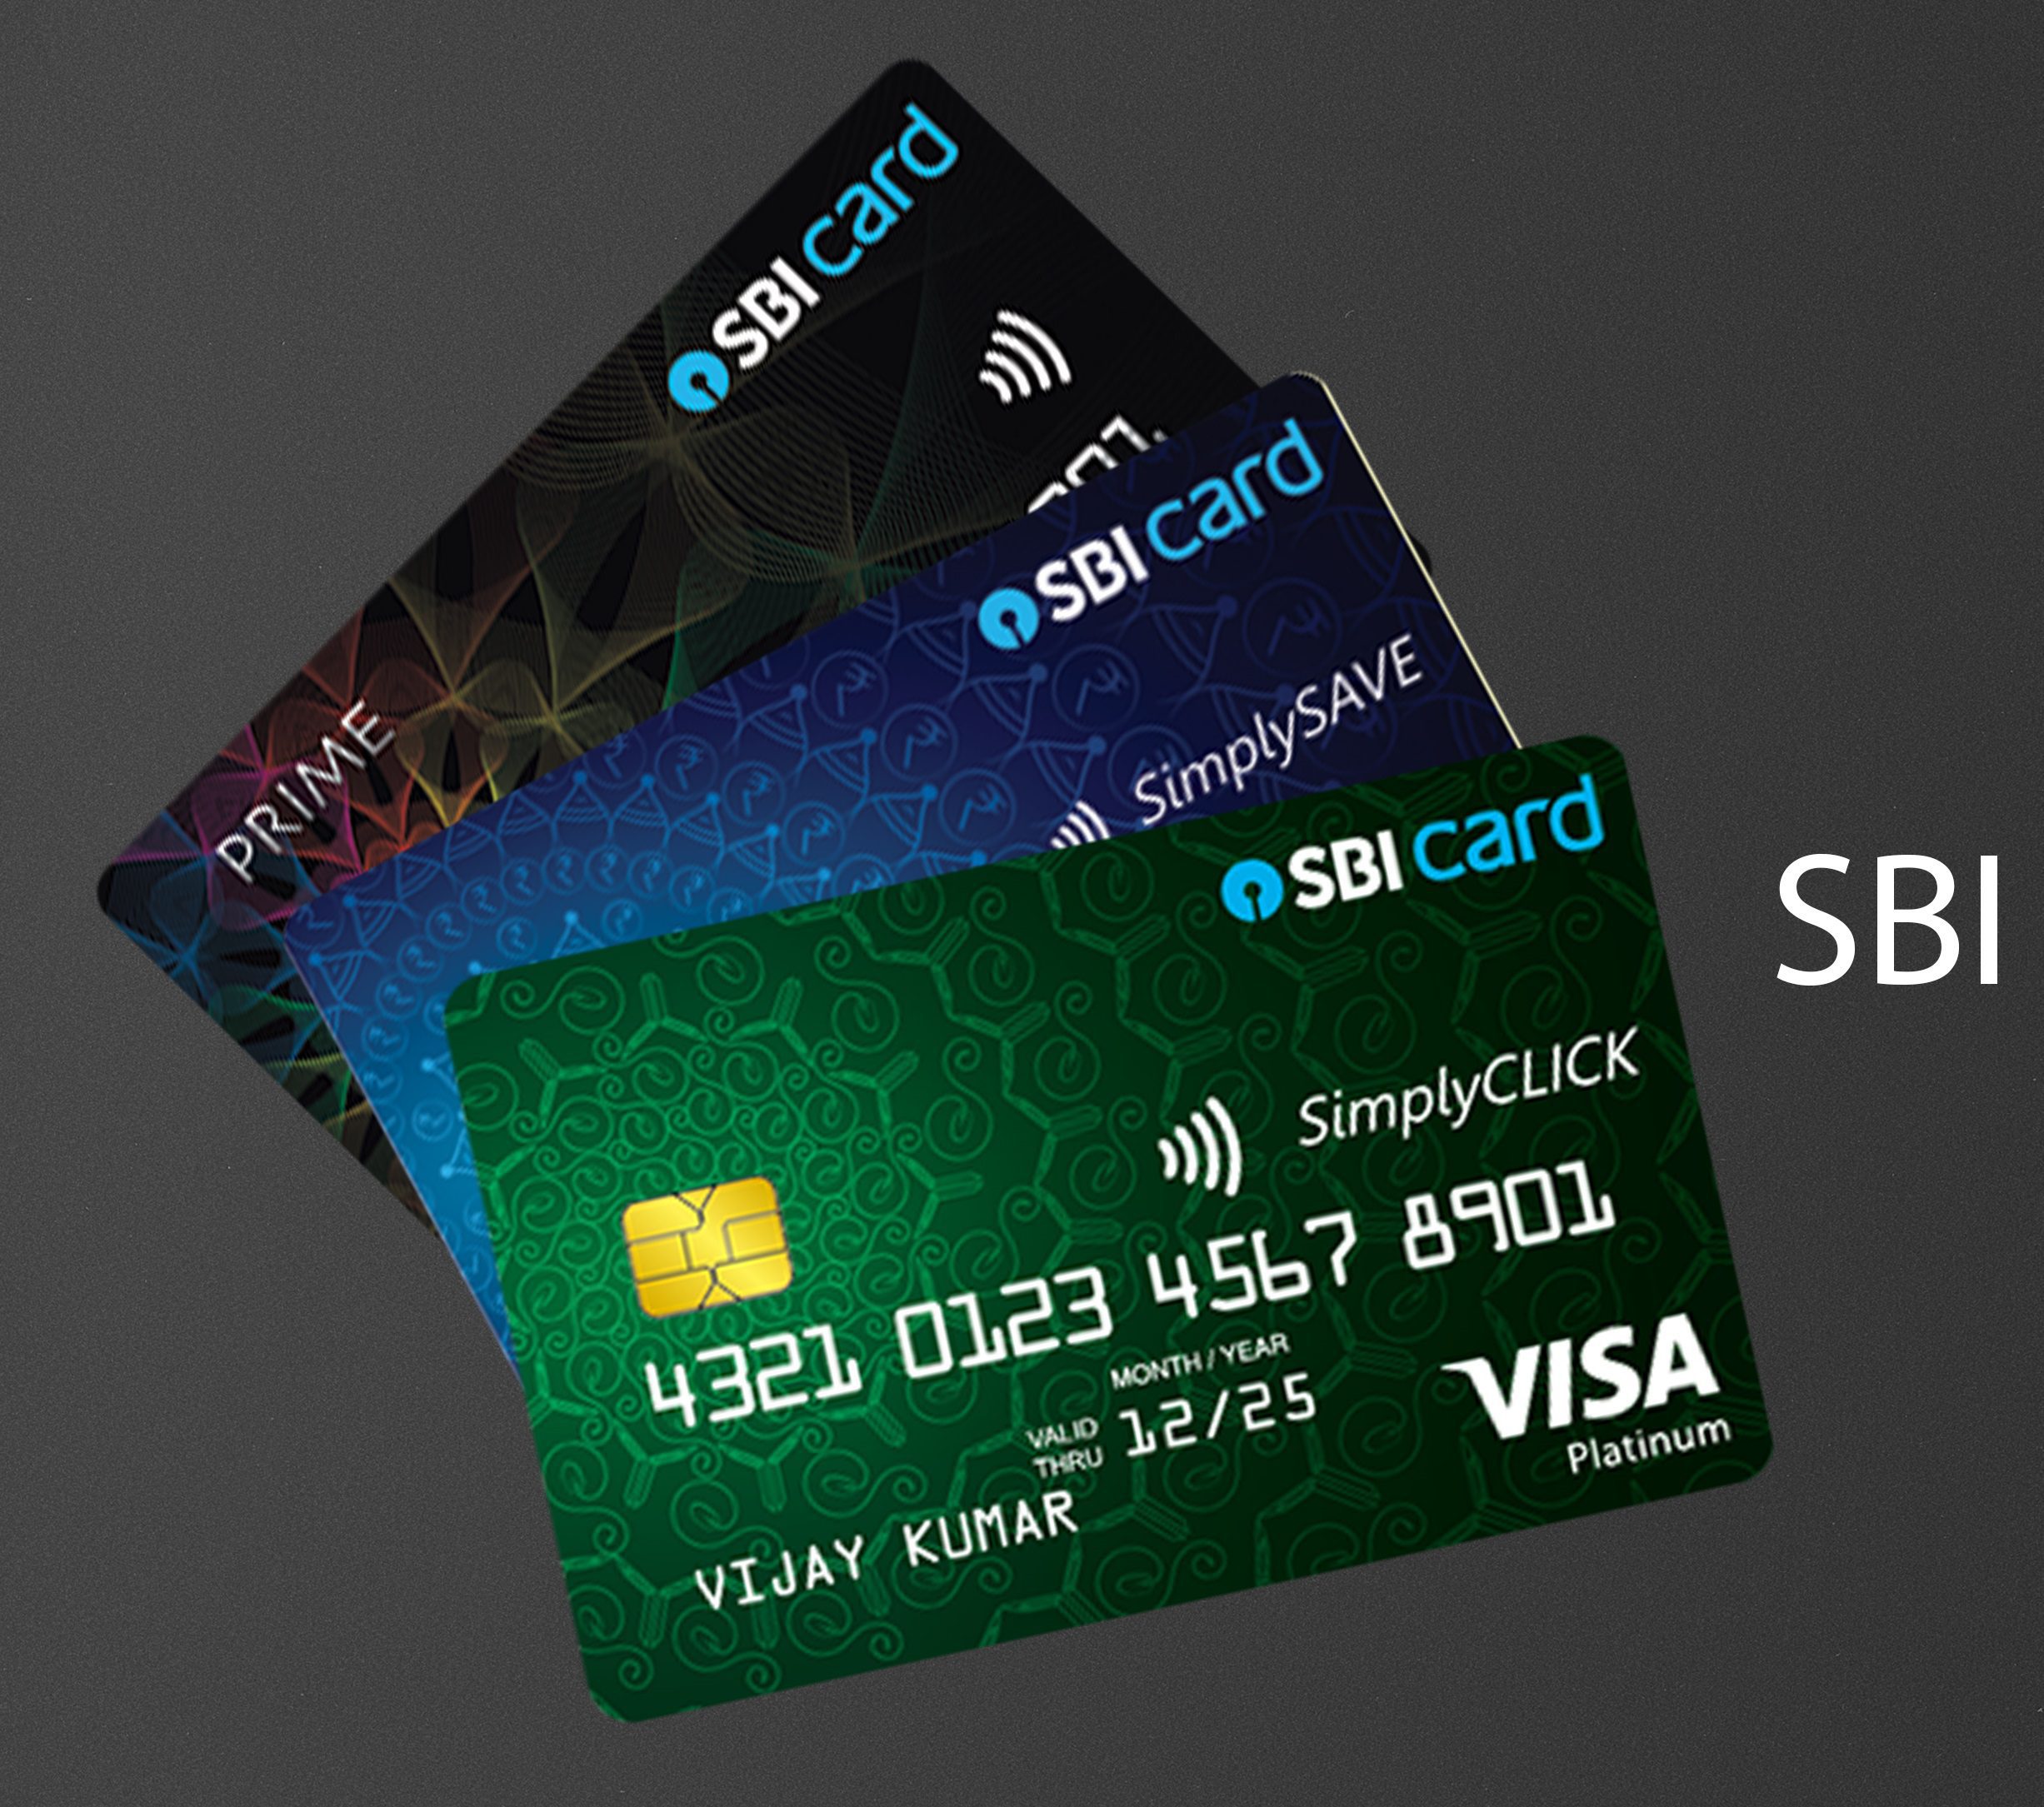 3 Best SBI Credit Card For Shopping and Rewards With its